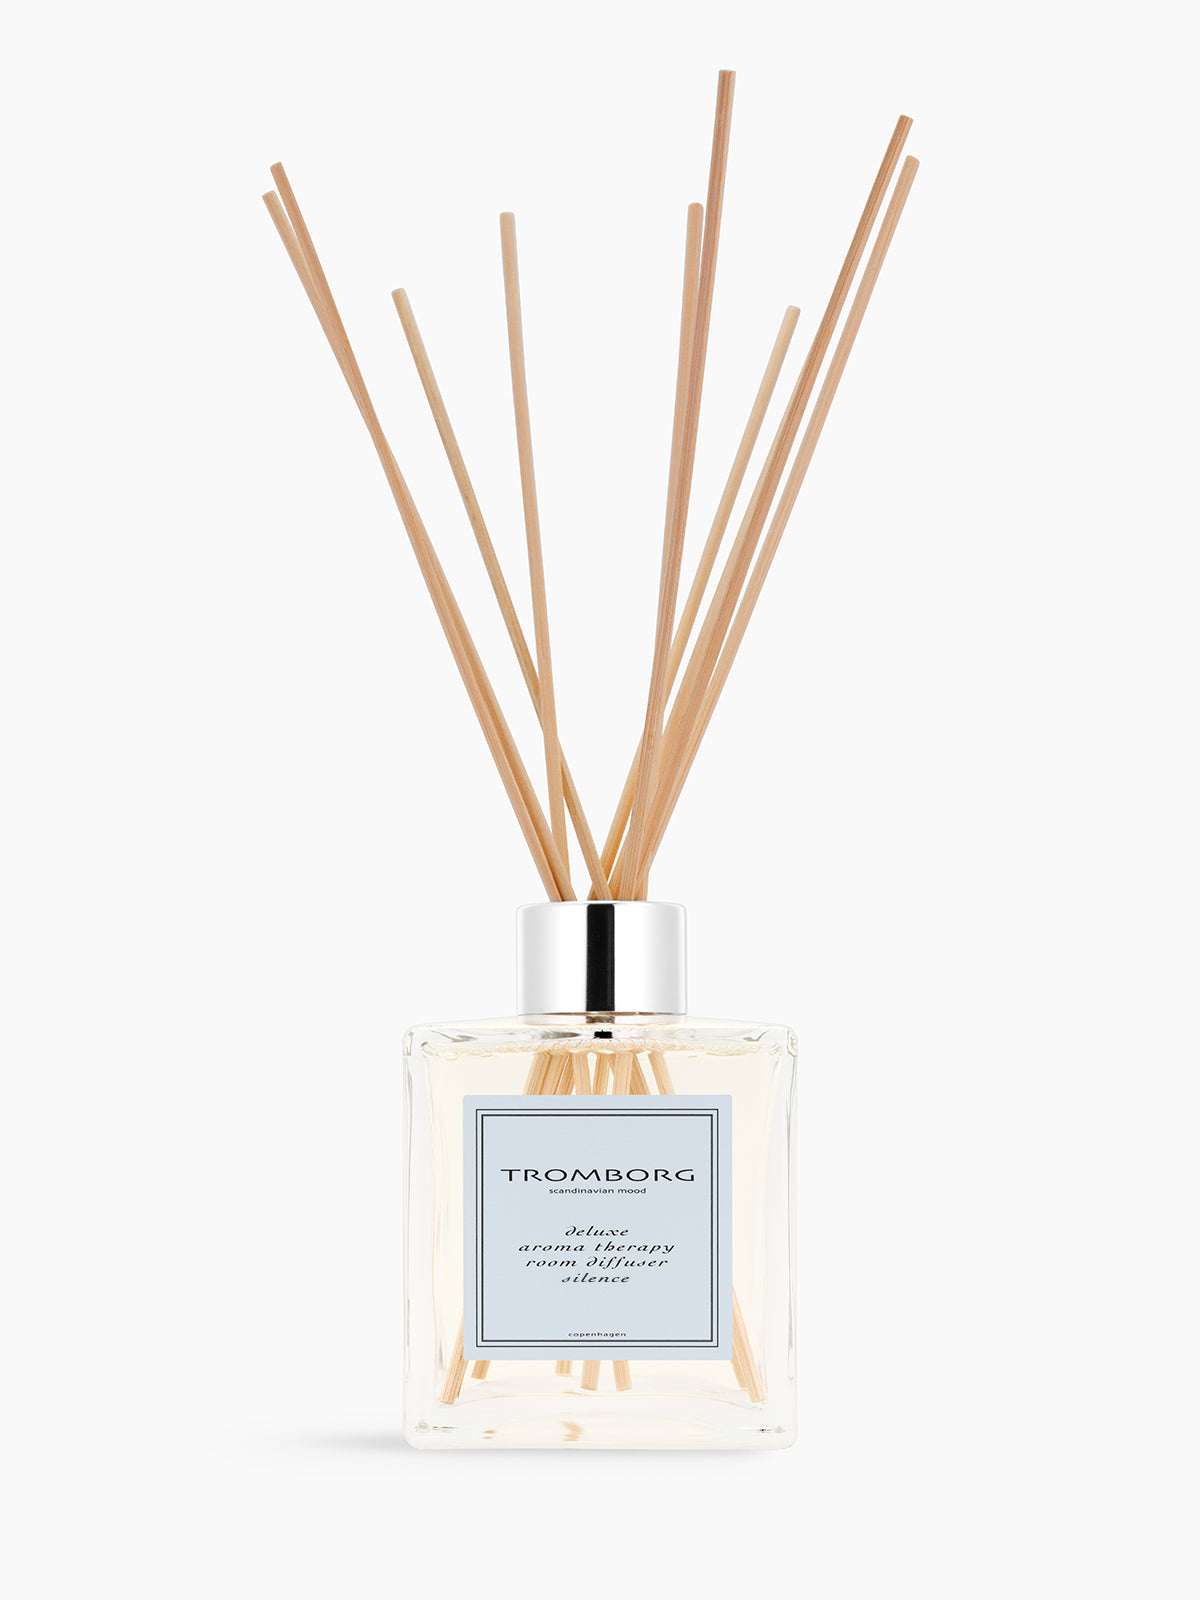 Tromborg Aroma Therapy Room Diffuser Silence 200 ml